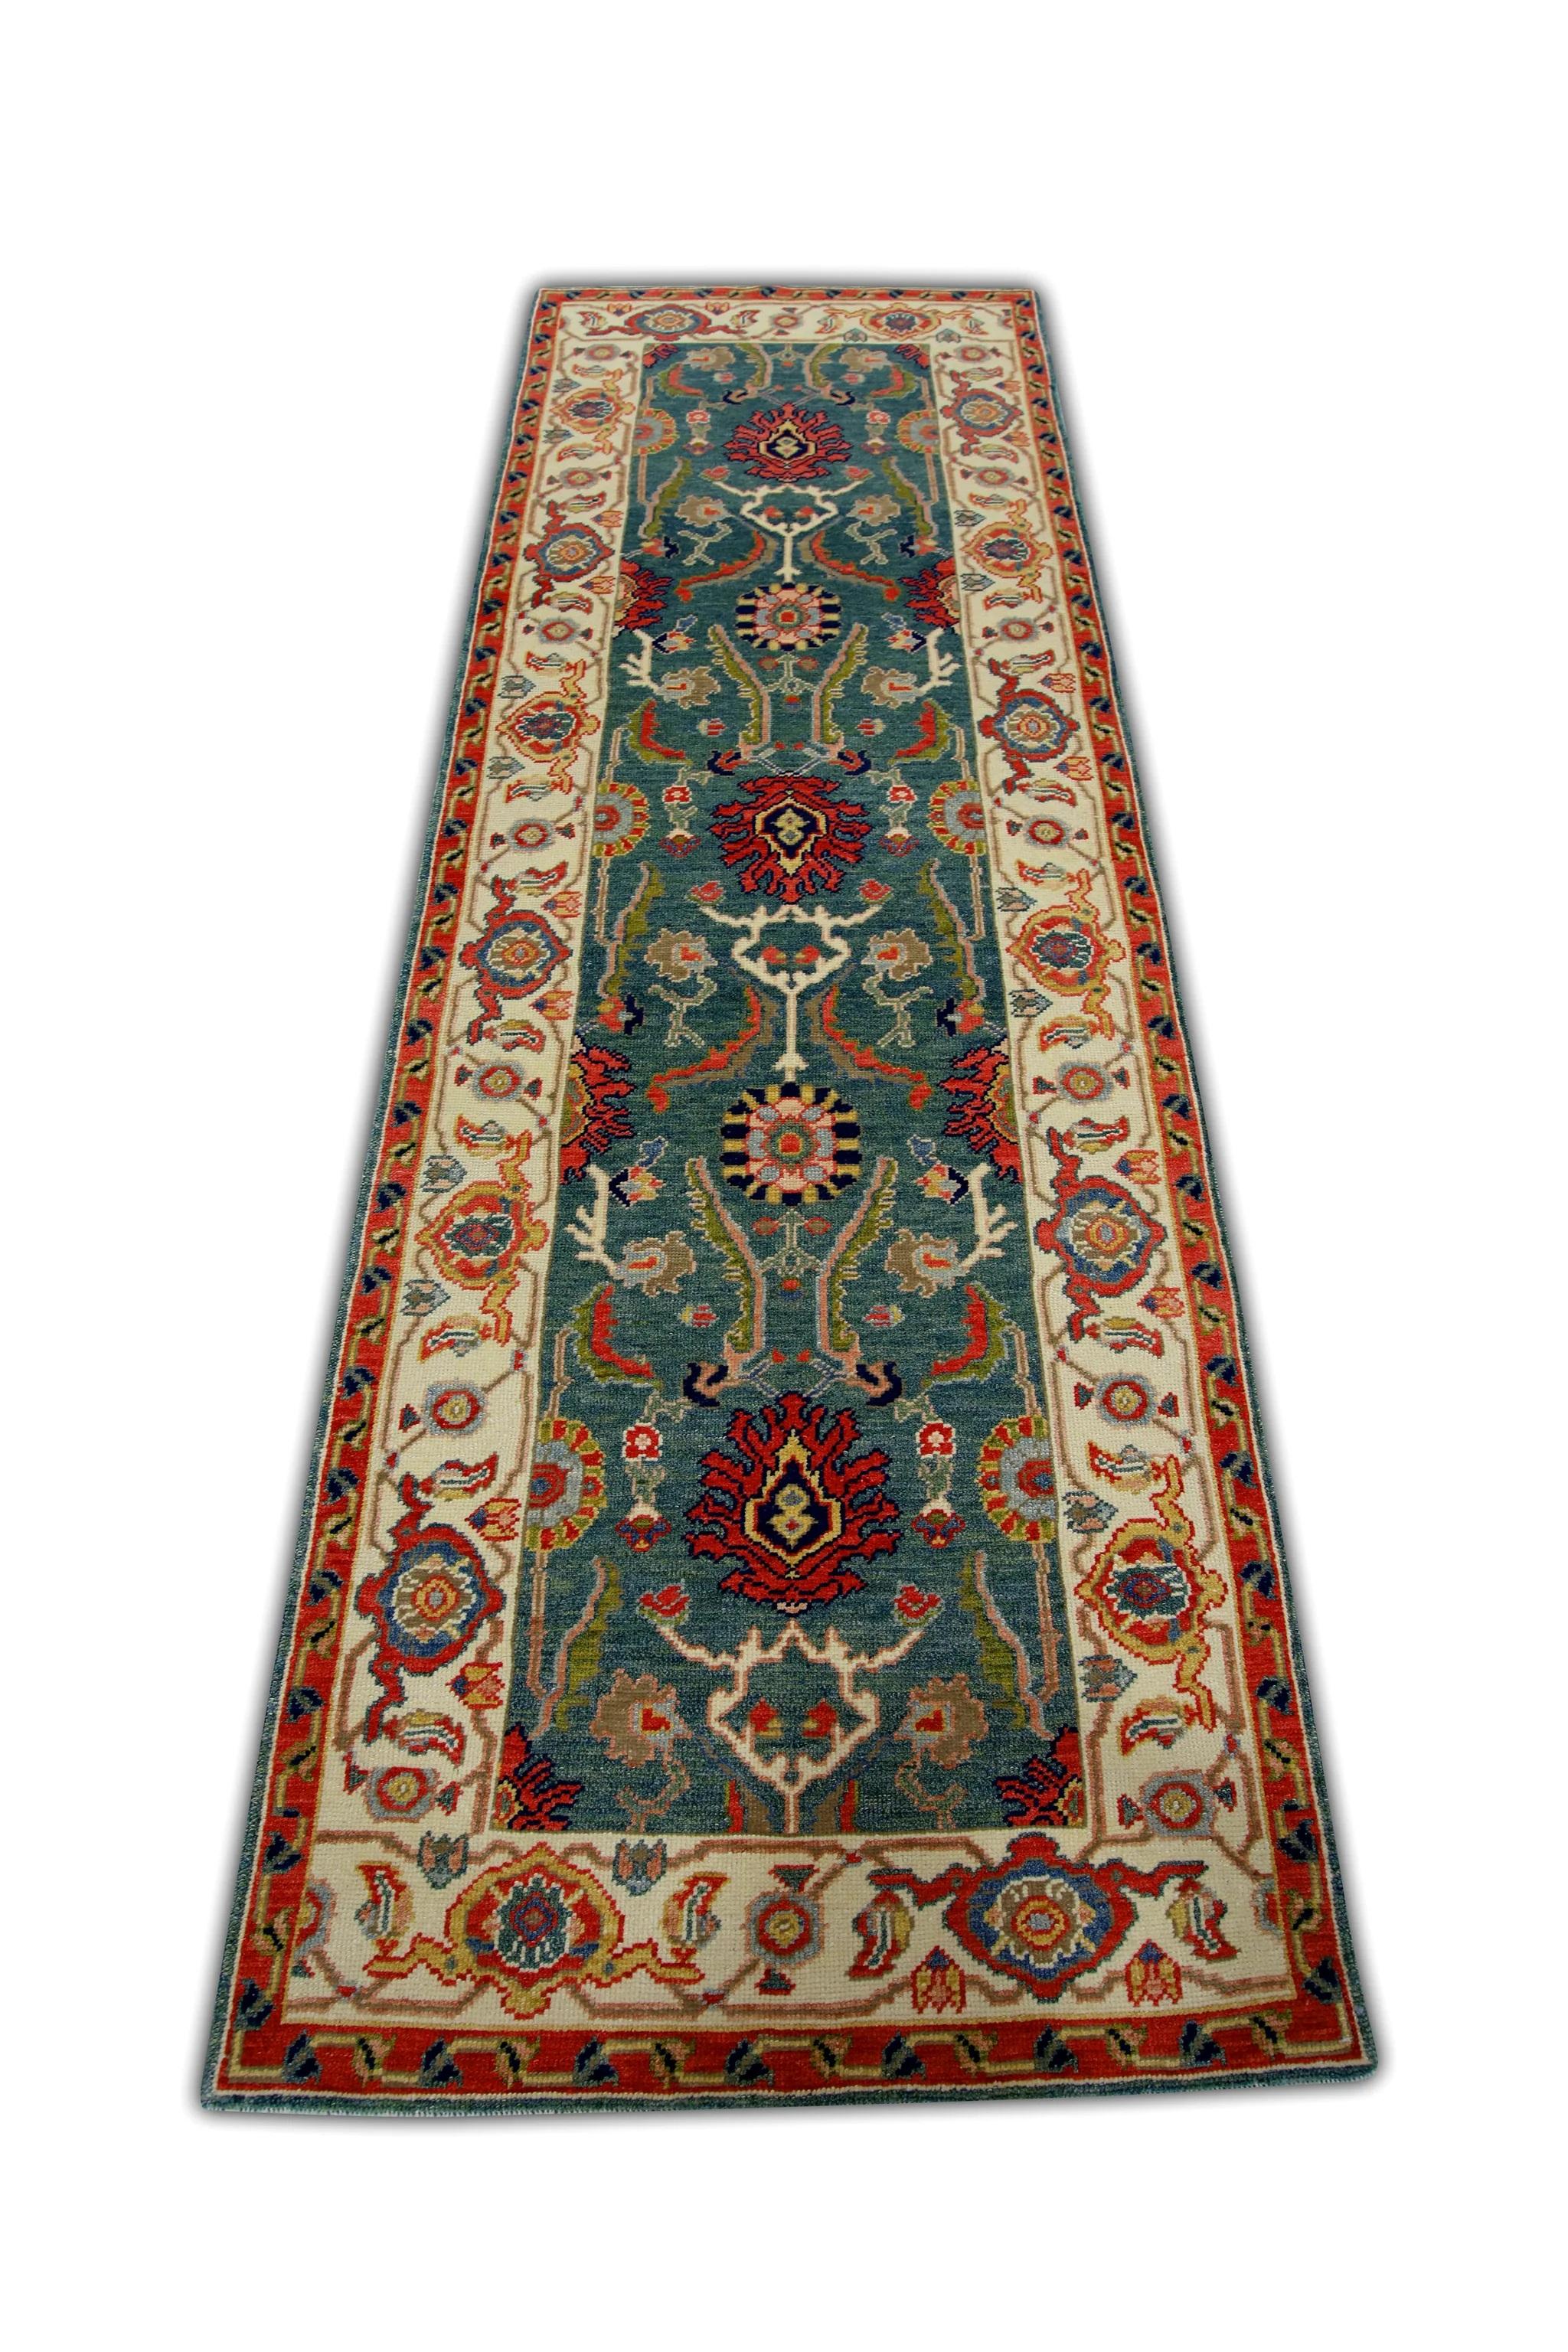 Cream, Green, and Red Floral Turkish Finewoven Wool Oushak Rug 2'7